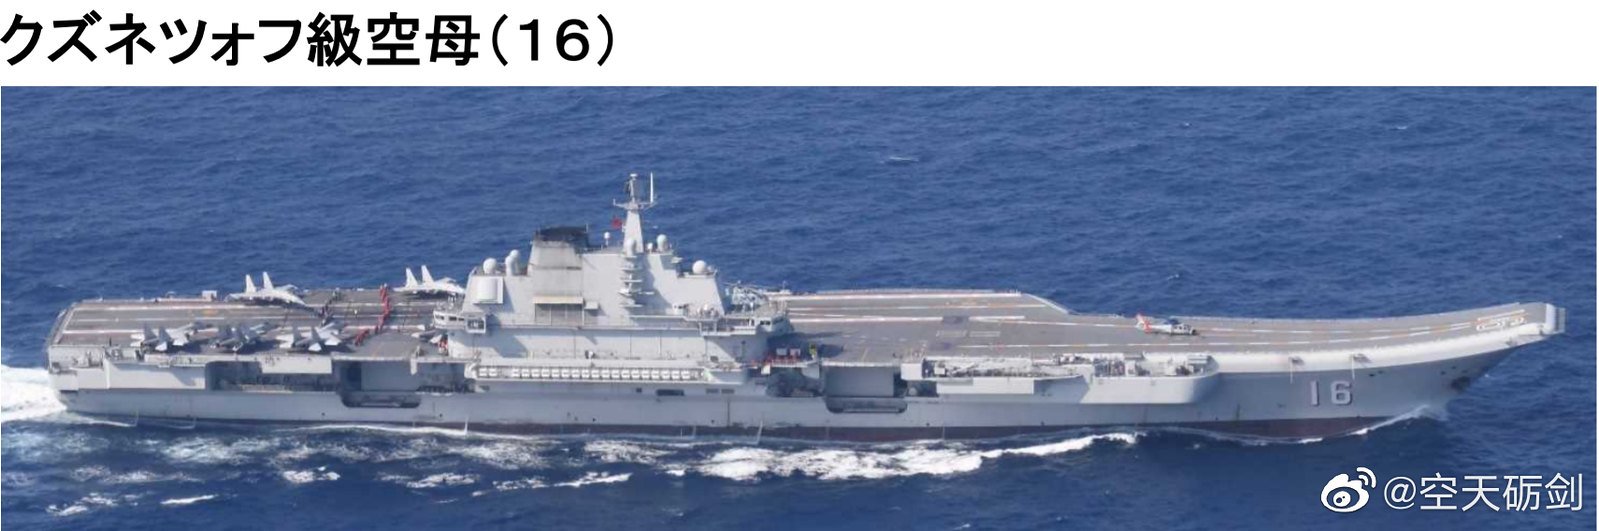 Rupprecht_A on Twitter: "The PLAN carrier (strike) group around the aircraft carrier 'Liaoning' has crossed the Miyako Strait early on 27 April. Seems as if its tour into the West Pacific and